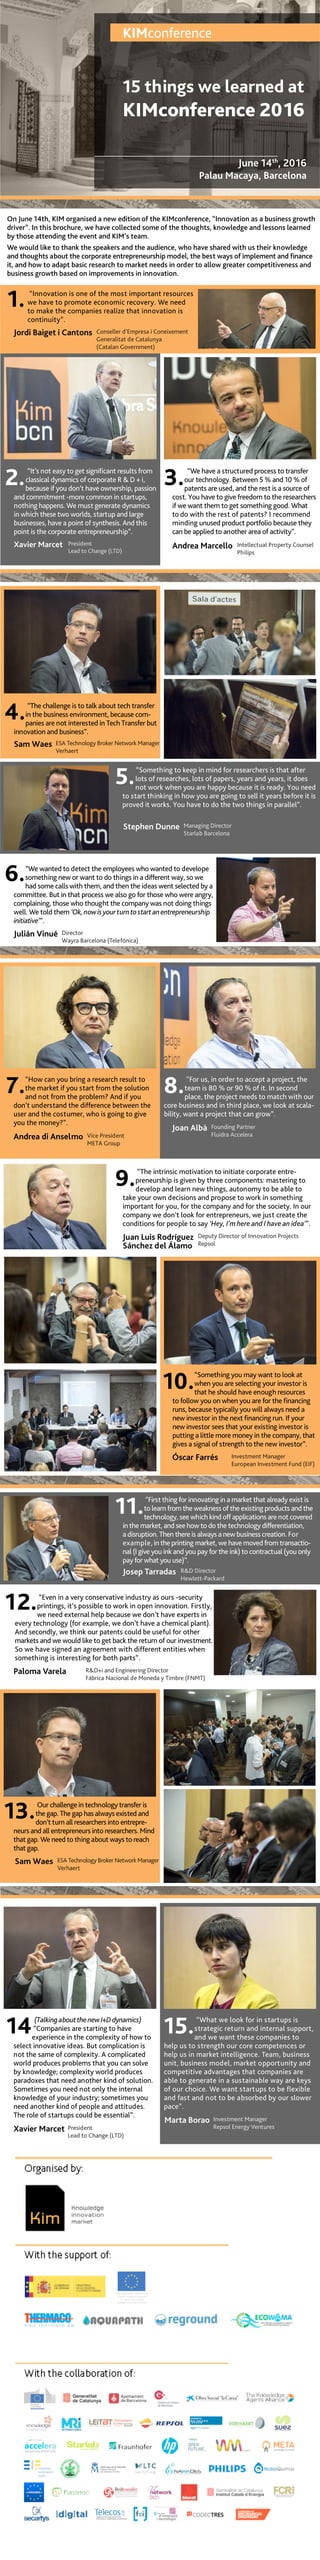 On June 14th, KIM organised a new edition of the KIMconference, “Innovation as a business growth
driver”. In this brochure, we have collected some of the thoughts, knowledge and lessons learned
by those attending the event and KIM’s team.
We would like to thank the speakers and the audience, who have shared with us their knowledge
and thoughts about the corporate entrepreneurship model, the best ways of implement and finance
it, and how to adapt basic research to market needs in order to allow greater competitiveness and
business growth based on improvements in innovation.
“Innovation is one of the most important resources
we have to promote economic recovery. We need
to make the companies realize that innovation is
continuity”.
Jordi Baiget i Cantons Conseller d’Empresa i Coneixement
Generalitat de Catalunya
(Catalan Government)
1.
KIMconference
15 things we learned at
KIMconference 2016
June 14th
, 2016
Palau Macaya, Barcelona
	“It’s not easy to get significant results from
classical dynamics of corporate R & D + i,
because if you don’t have ownership, passion
and commitment -more common in startups,
nothing happens. We must generate dynamics
in which these two worlds, startup and large 	
businesses, have a point of synthesis. And this
point is the corporate entrepreneurship”.
2. 	 “We have a structured process to transfer
our technology. Between 5 % and 10 % of
patents are used, and the rest is a source of
cost. You have to give freedom to the researchers
if we want them to get something good. What
to do with the rest of patents? I recommend
minding unused product portfolio because they
can be applied to another area of activity”.
3.
Andrea Marcello Intellectual Property Counsel
Philips
Xavier Marcet President
Lead to Change (LTD)
	“The challenge is to talk about tech transfer
in the business environment, because com-
panies are not interested in Tech Transfer but
innovation and business”.
4.
Sam Waes ESA Technology Broker Network Manager
Verhaert
	“Something to keep in mind for researchers is that after
lots of researches, lots of papers, years and years, it does
not work when you are happy because it is ready. You need
to start thinking in how you are going to sell it years before it is
proved it works. You have to do the two things in parallel”.
5.
Stephen Dunne Managing Director
Starlab Barcelona
“We wanted to detect the employees who wanted to develope
something new or want to do things in a different way, so we
had some calls with them, and then the ideas went selected by a
committee. But in that process we also go for those who were angry,
complaining, those who thought the company was not doing things
well. We told them ‘Ok,nowisyourturntostartanentrepreneurship
initiative’”.
6.
Julián Vinué Director
Wayra Barcelona (Telefónica)
“How can you bring a research result to
the market if you start from the solution
and not from the problem? And if you
don’t understand the difference between the
user and the costumer, who is going to give
you the money?”.
Andrea di Anselmo Vice President
META Group
7. “For us, in order to accept a project, the
team is 80 % or 90 % of it. In second
place, the project needs to match with our
core business and in third place, we look at scala-
bility, want a project that can grow”.
8.
Joan Albà Founding Partner
Fluidra Accelera
“Something you may want to look at
when you are selecting your investor is
that he should have enough resources
to follow you on when you are for the financing
runs, because typically you will always need a
new investor in the next financing run. If your
new investor sees that your existing investor is
putting a little more money in the company, that
gives a signal of strength to the new investor”.
10.
Óscar Farrés Investment Manager
European Investment Fund (EIF)
“Even in a very conservative industry as ours -security
printings, it’s possible to work in open innovation. Firstly,
we need external help because we don’t have experts in
every technology (for example, we don’t have a chemical plant).
And secondly, we think our patents could be useful for other
markets and we would like to get back the return of our investment.
So we have signed an agreement with different entities when
something is interesting for both parts”.
12.
Paloma Varela R&D+i and Engineering Director
Fábrica Nacional de Moneda y Timbre (FNMT)
“The intrinsic motivation to initiate corporate entre-
preneurship is given by three components: mastering to
develop and learn new things, autonomy to be able to
take your own decisions and propose to work in something
important for you, for the company and for the society. In our
company we don’t look for entrepreneurs, we just create the
conditions for people to say ‘Hey, I’m here and I have an idea’”.
9.
Juan Luis Rodríguez
Sánchez del Álamo
Deputy Director of Innovation Projects
Repsol
“First thing for innovating in a market that already exist is
to learn from the weakness of the existing products and the
technology, see which kind off applications are not covered
in the market, and see how to do the technology differentiation,
a disruption. Then there is always a new business creation. For
example, in the printing market, we have moved from transactio-
nal (I give you ink and you pay for the ink) to contractual (you only
pay for what you use)”.
11.
Josep Tarradas R&D Director
Hewlett-Packard
Our challenge in technology transfer is
the gap. The gap has always existed and
don’t turn all researchers into entrepre-
neurs and all entrepreneurs into researchers. Mind
that gap. We need to thing about ways to reach
that gap.
13.
Sam Waes ESA Technology Broker Network Manager
Verhaert
(TalkingaboutthenewI+Ddynamics)
“Companies are starting to have
experience in the complexity of how to
select innovative ideas. But complication is
not the same of complexity. A complicated
world produces problems that you can solve
by knowledge; complexity world produces
paradoxes that need another kind of solution.
Sometimes you need not only the internal
knowledge of your industry; sometimes you
need another kind of people and attitudes.
The role of startups could be essential”.
Xavier Marcet President
Lead to Change (LTD)
14 “What we look for in startups is
strategic return and internal support,
and we want these companies to
help us to strength our core competences or
help us in market intelligence. Team, business
unit, business model, market opportunity and
competitive advantages that companies are
able to generate in a sustainable way are keys
of our choice. We want startups to be flexible
and fast and not to be absorbed by our slower
pace”.
15.
Marta Borao Investment Manager
Repsol Energy Ventures
 